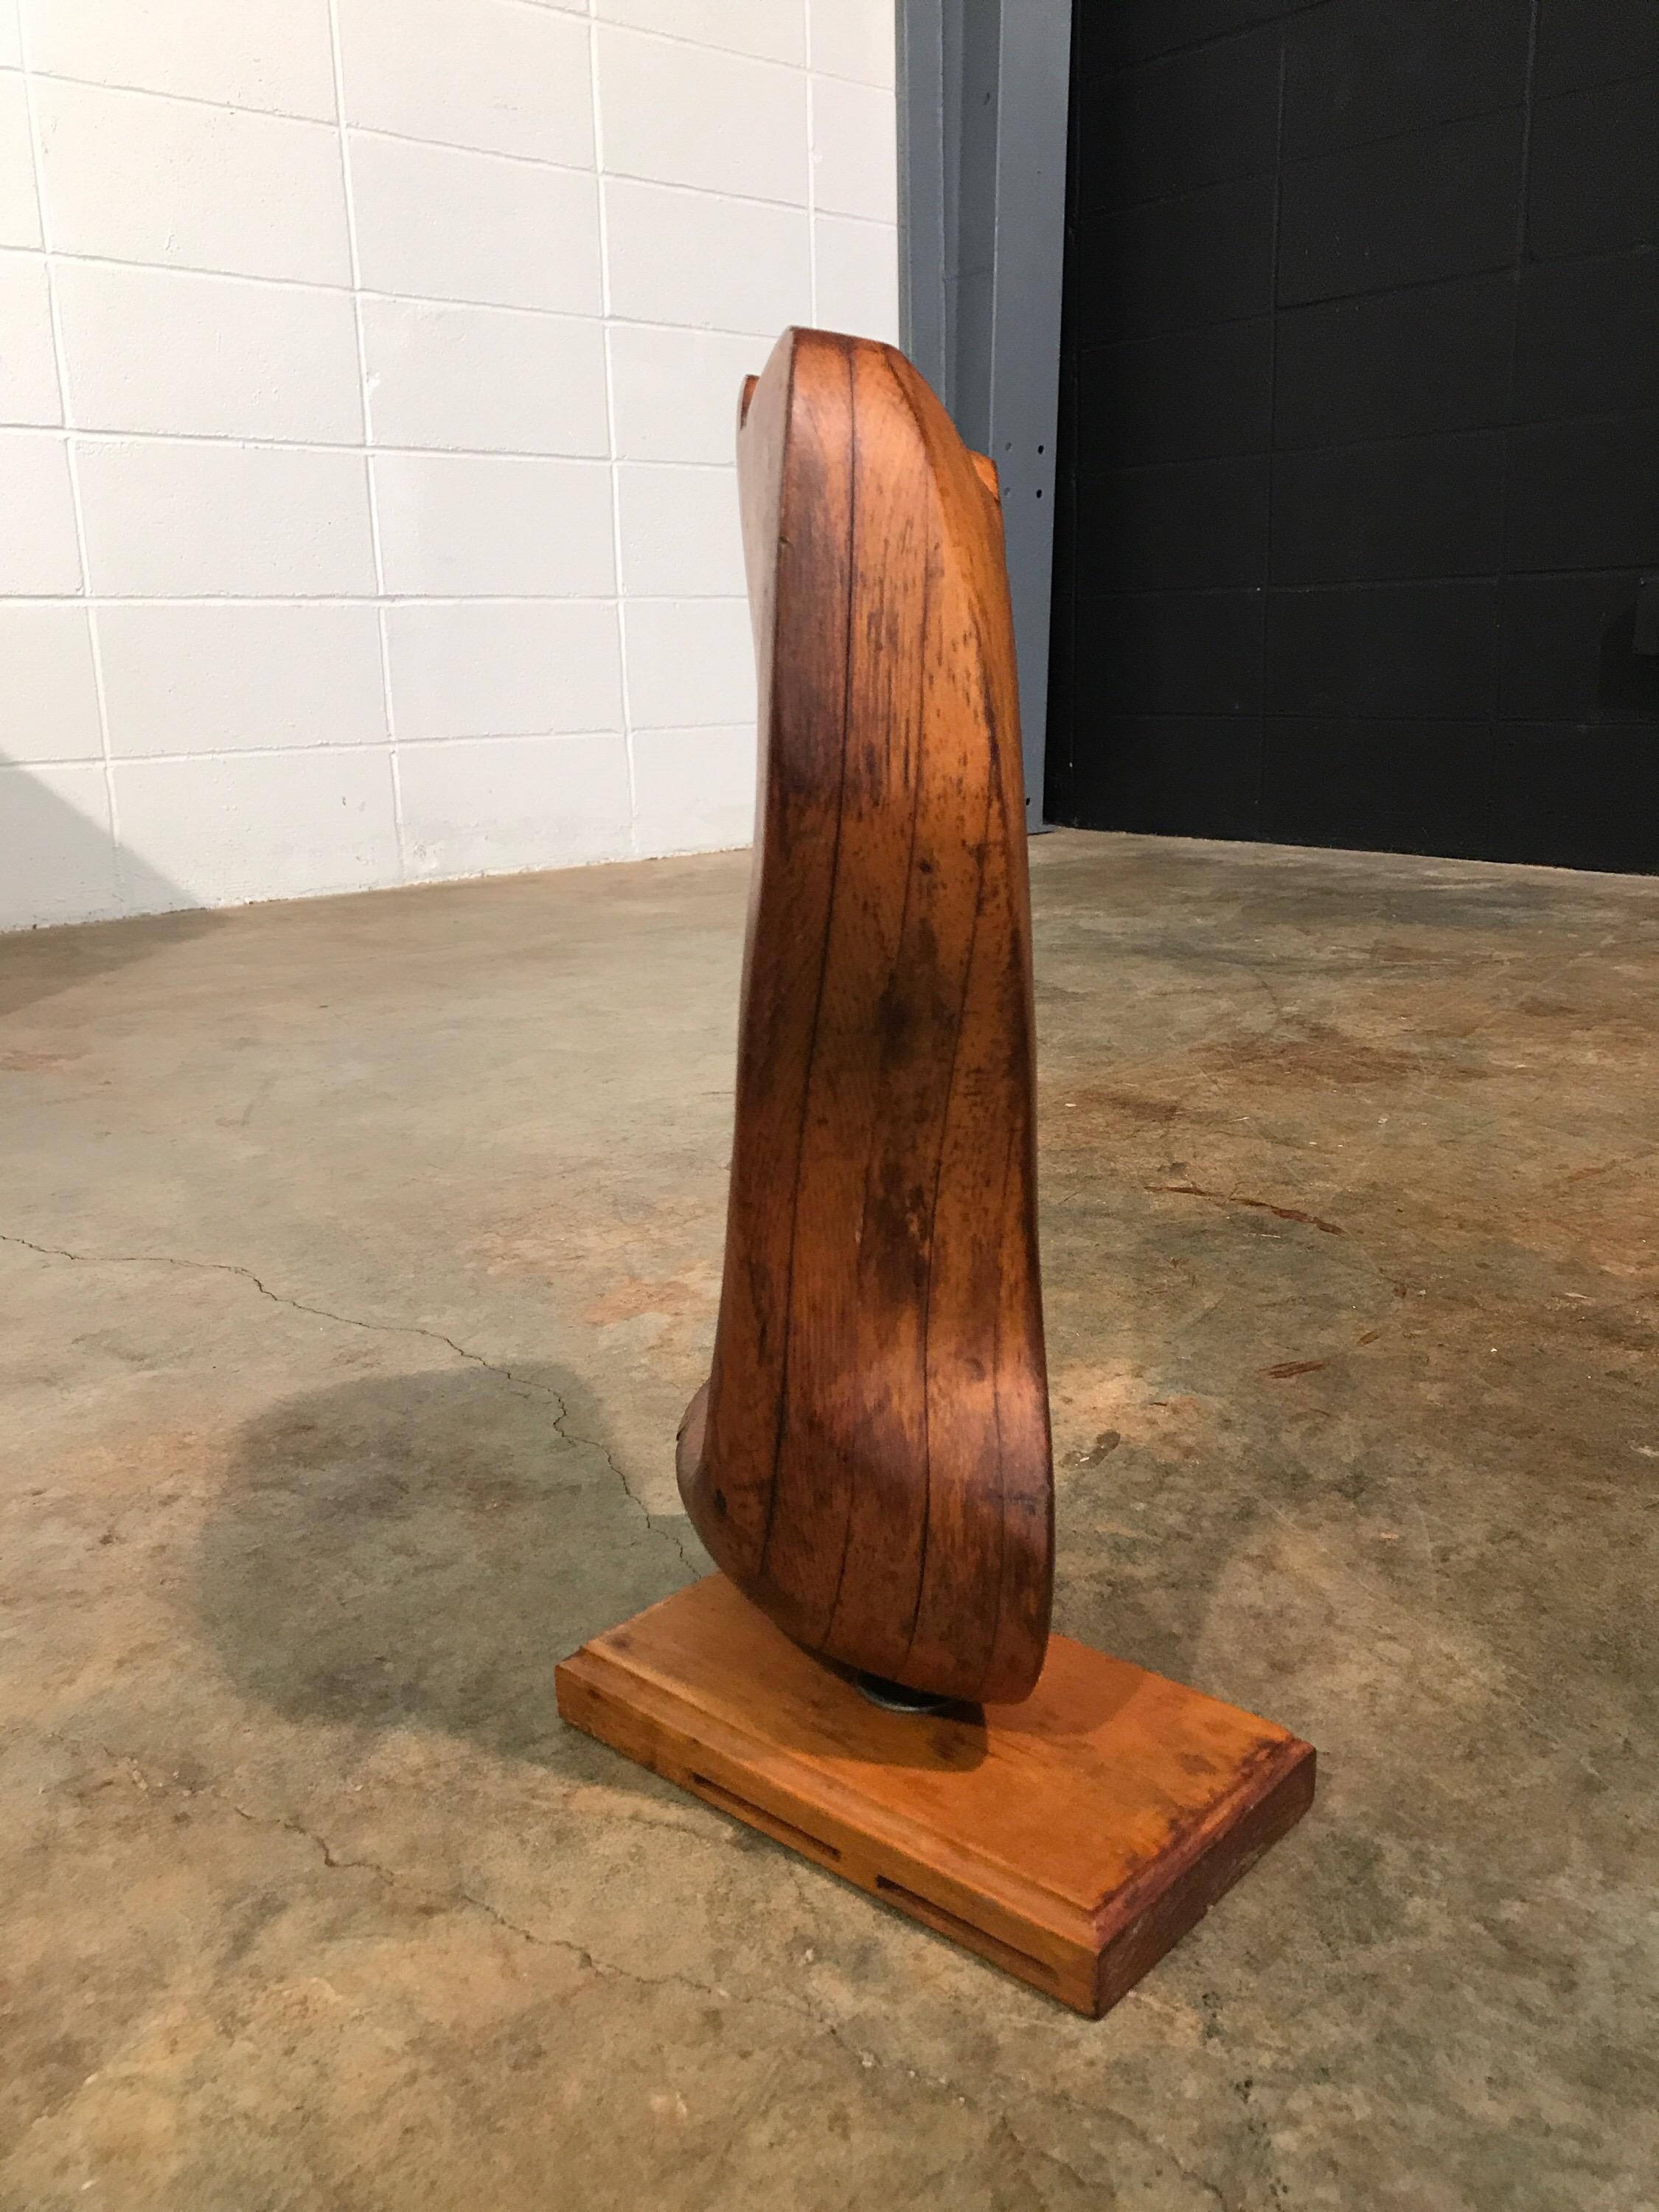 Early Modern Wood Sculpture Artist Signed L Ryan 1951, Rogue Wave, Vintage In Good Condition For Sale In Marietta, GA